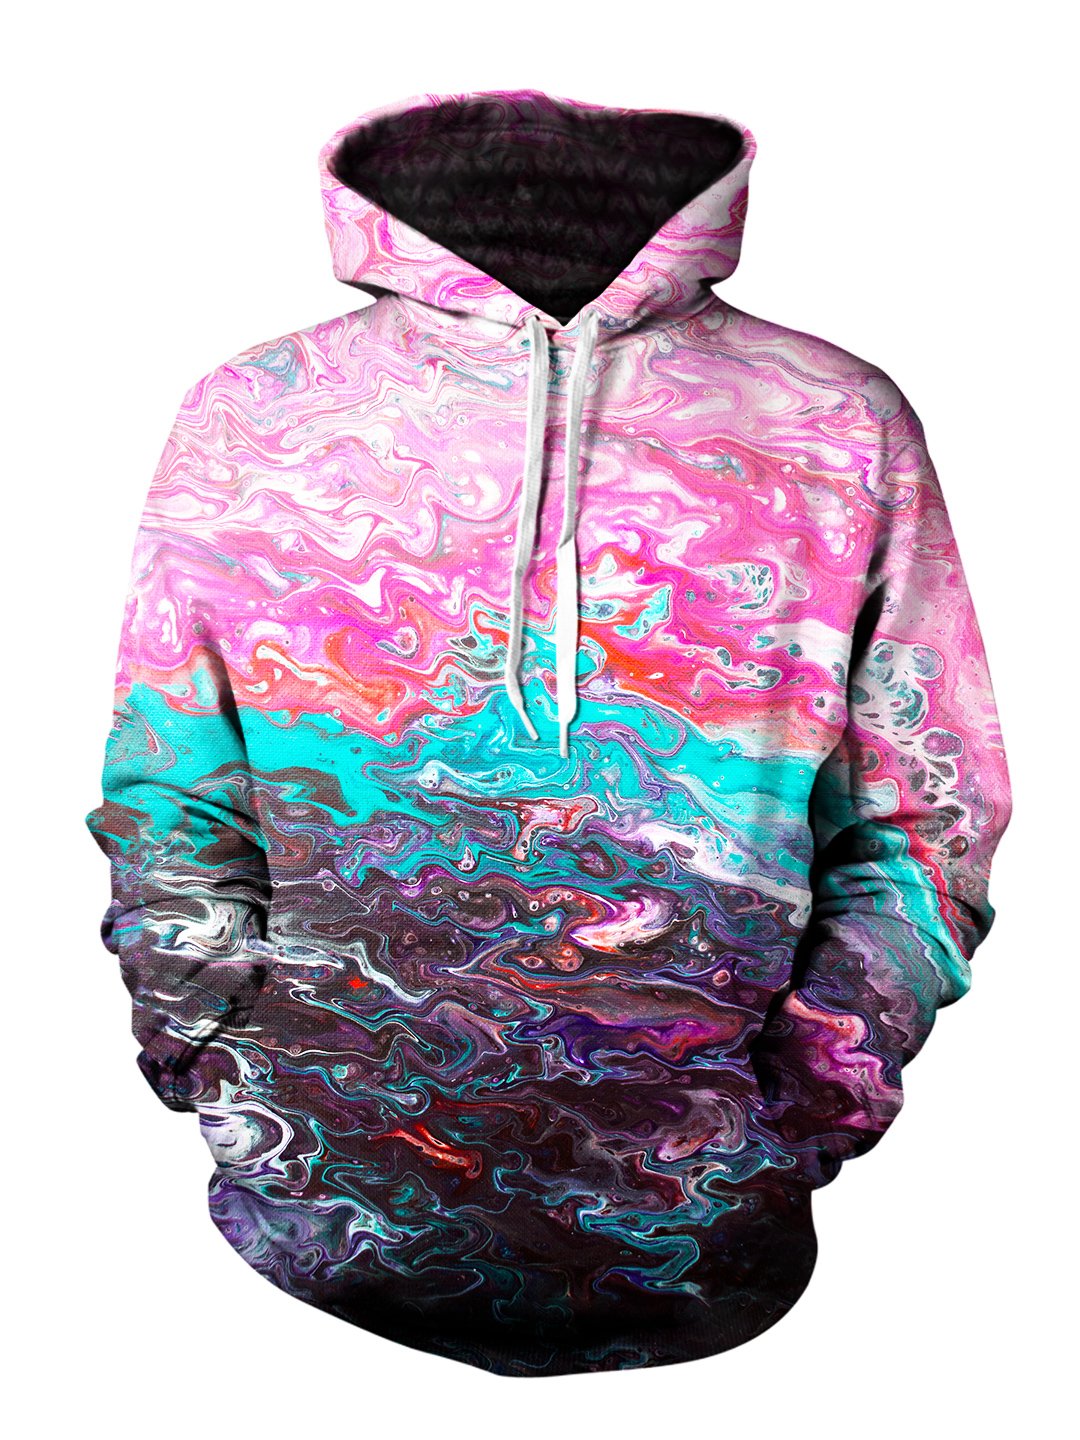 Men's pink, teal & black marbled paint pullover hoodie front view.